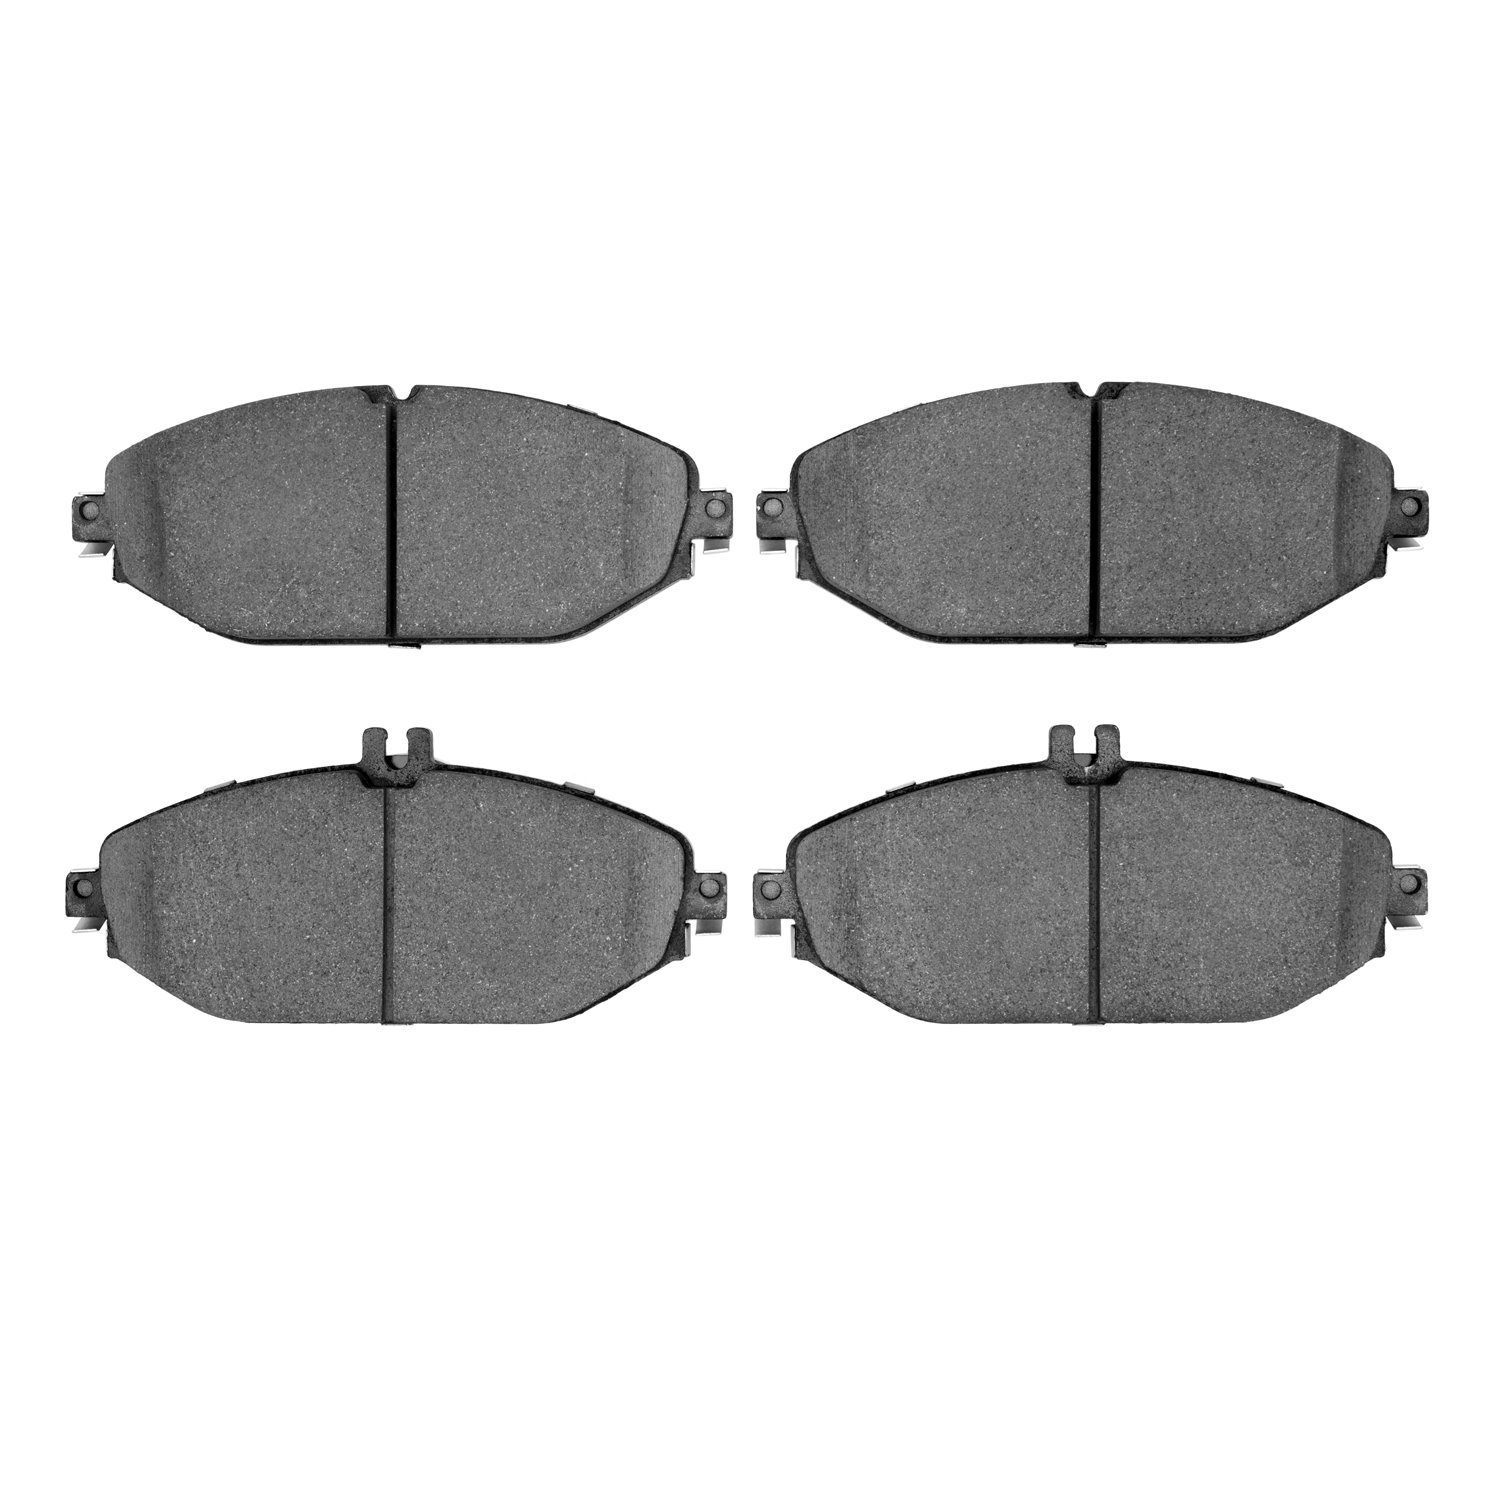 1600-1794-00 5000 Euro Ceramic Brake Pads, Fits Select Mercedes-Benz, Position: Front